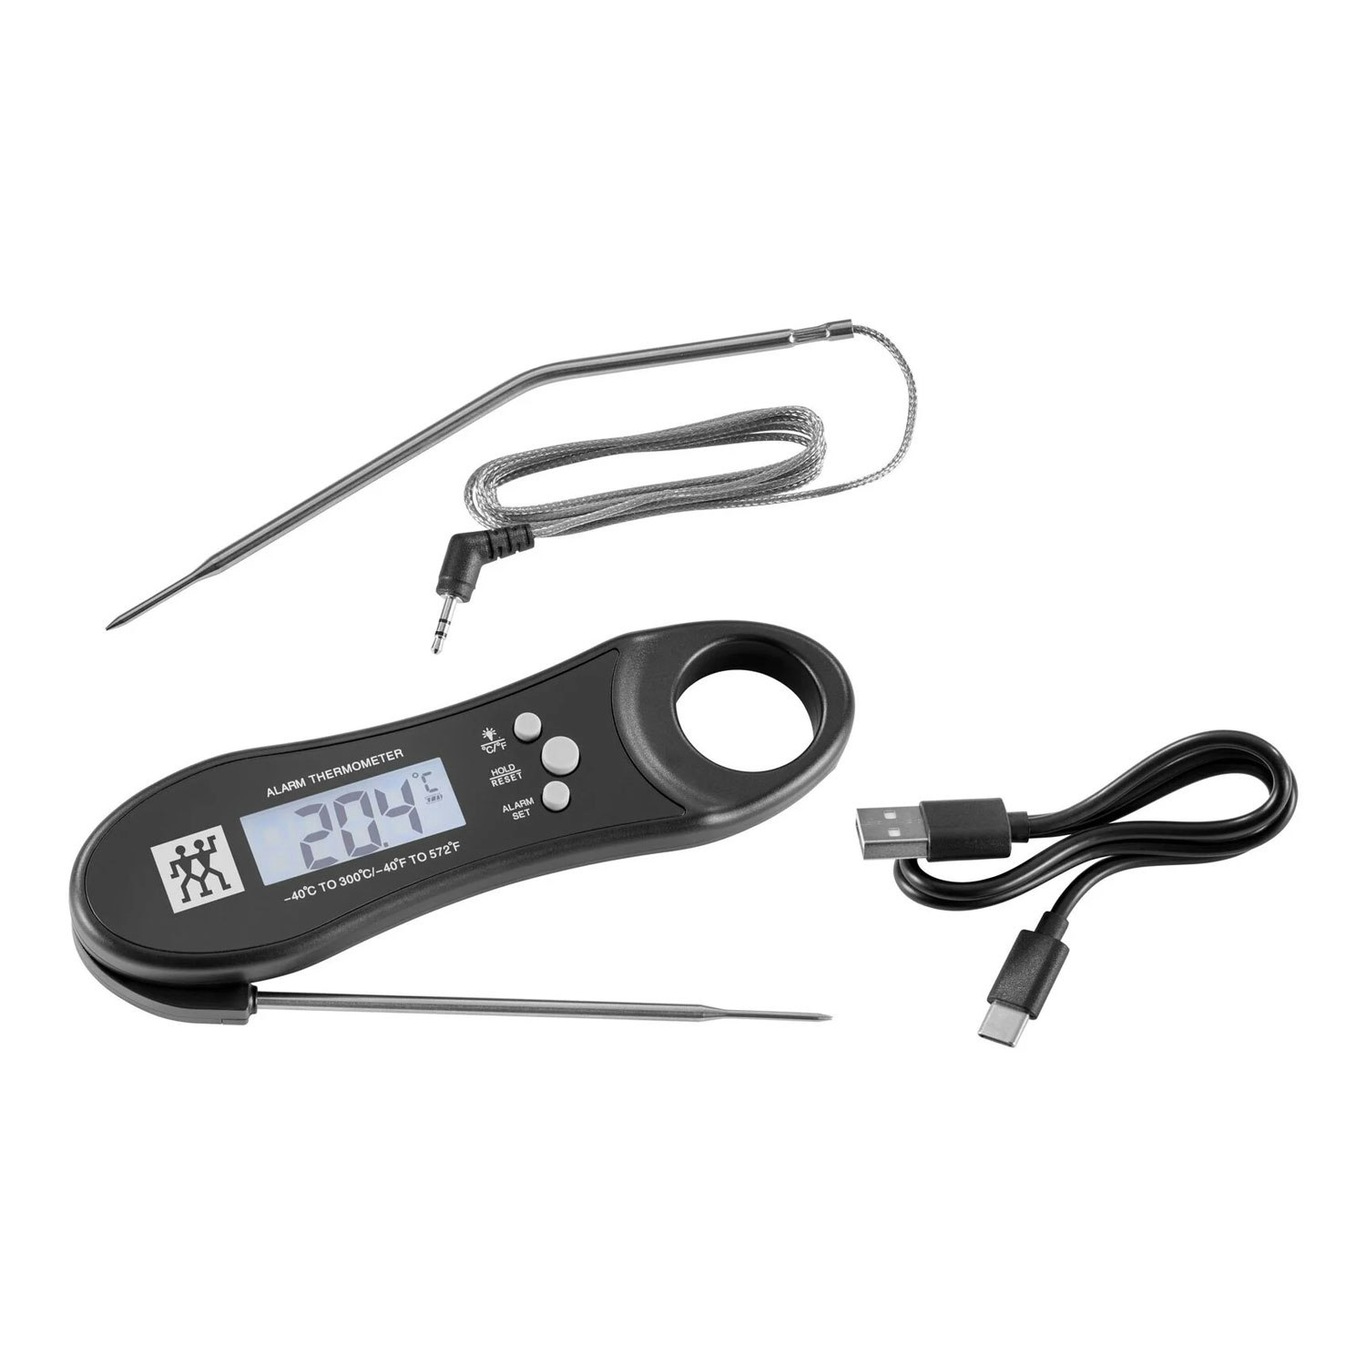 https://royaldesign.com/image/2/zwilling-bbq-thermometer-0?w=800&quality=80